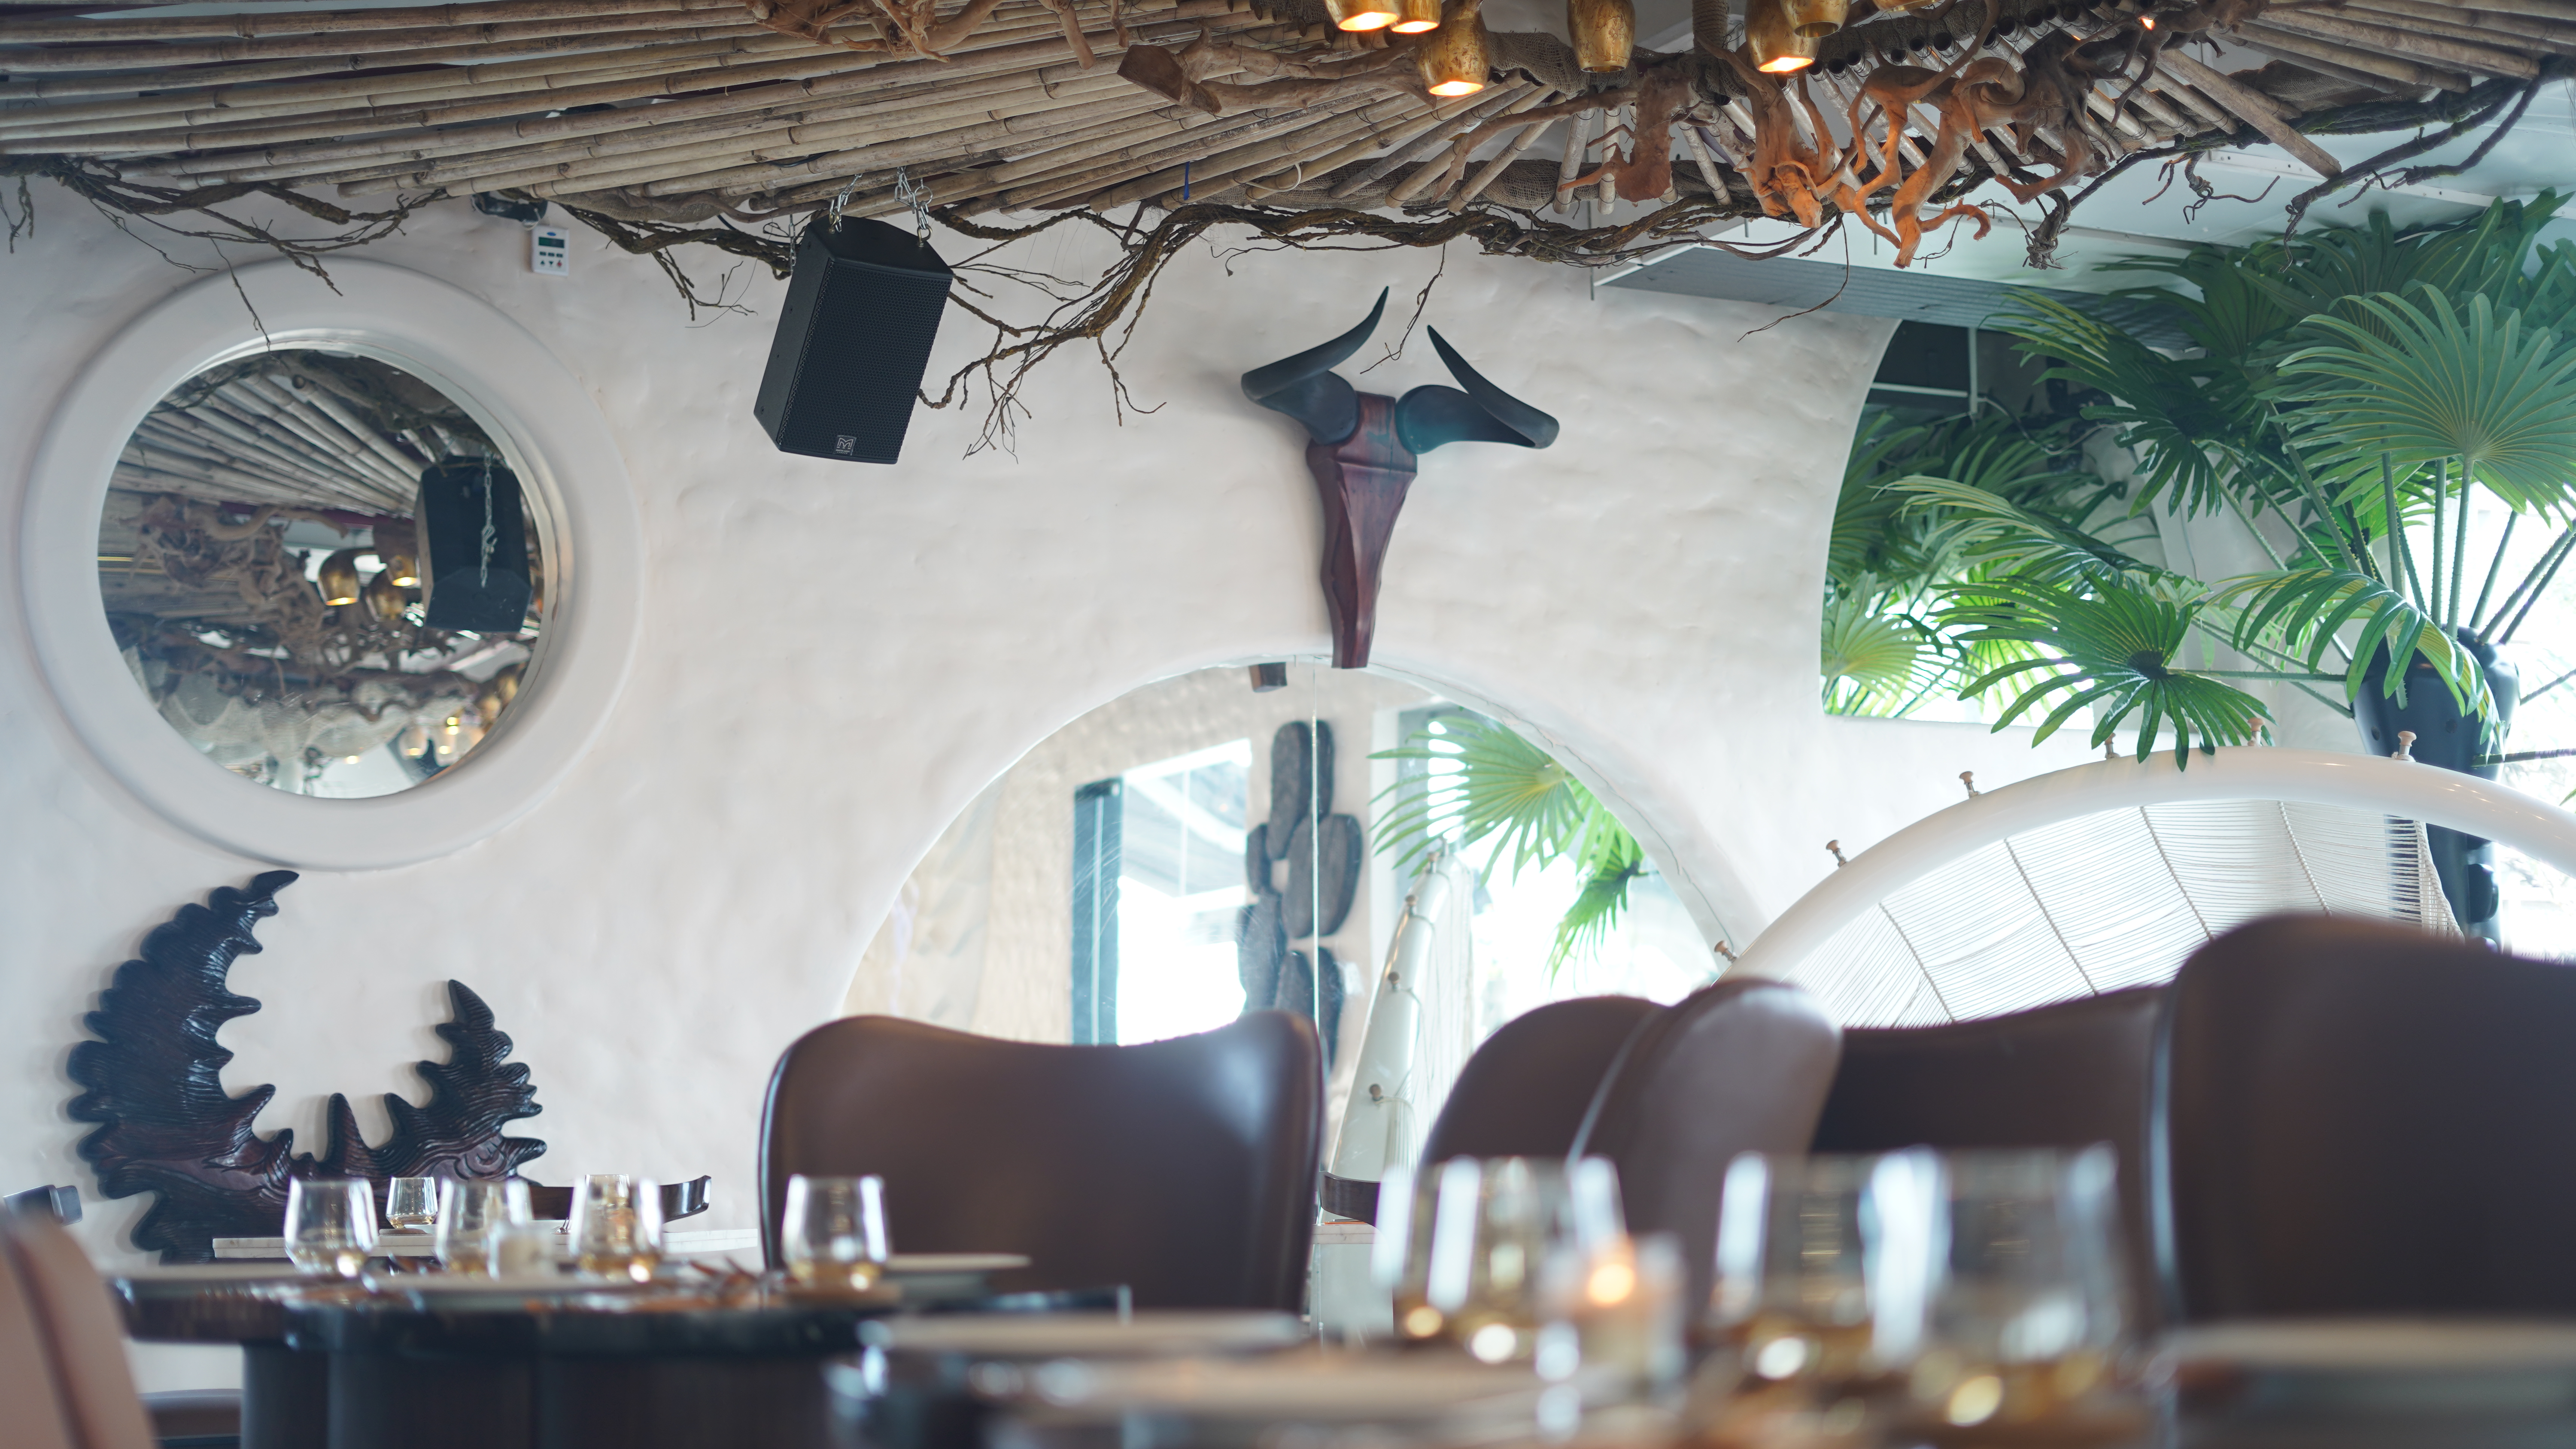 Auxible India integrate Audio visual system at Bougie rustic cafe